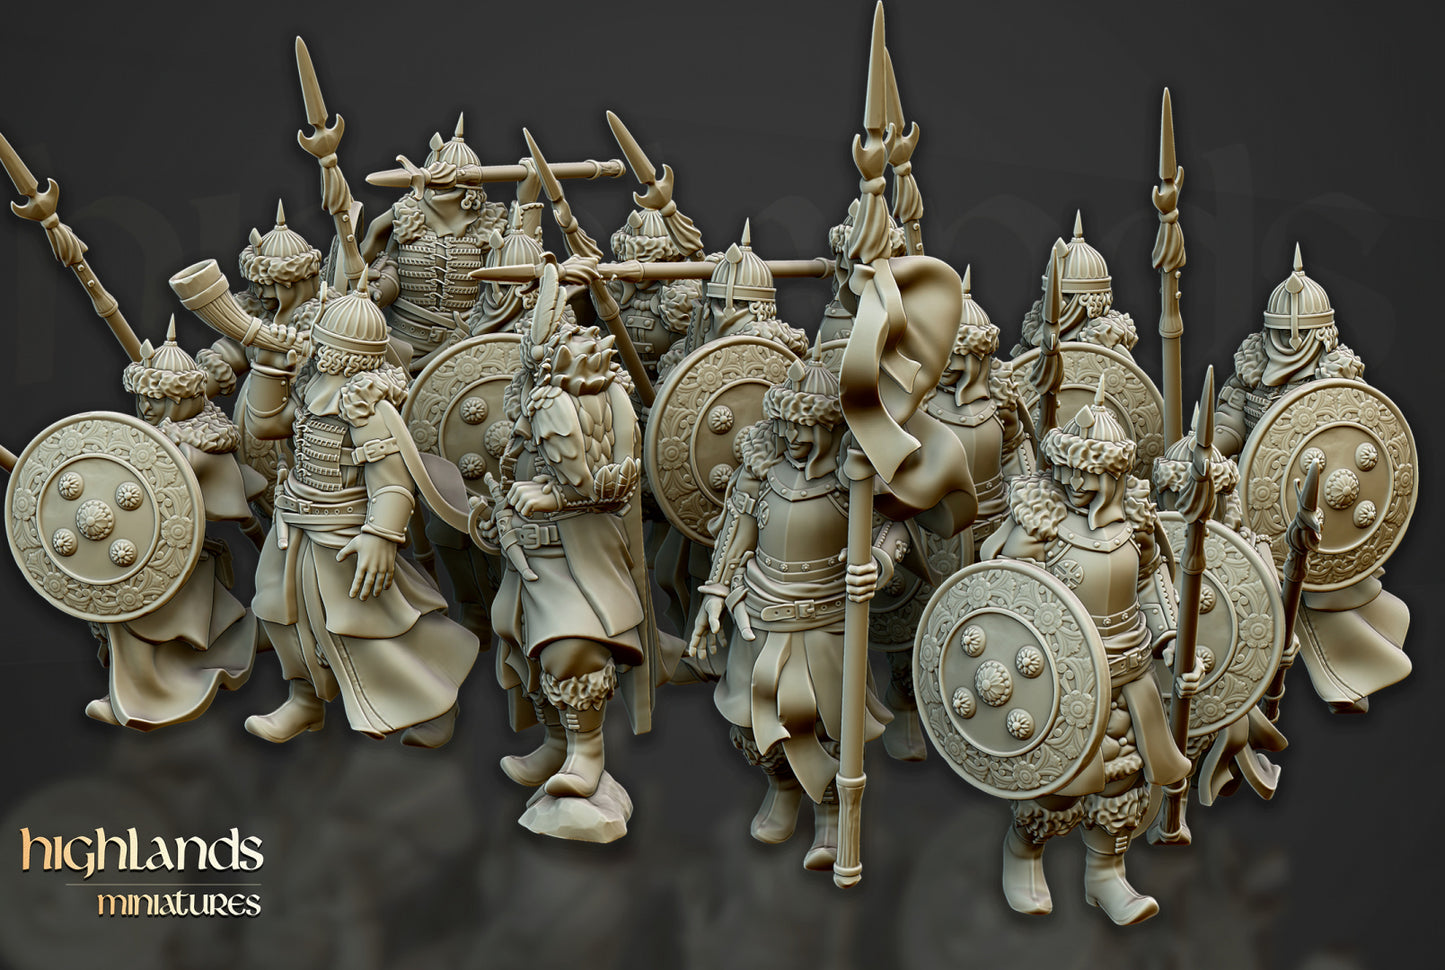 28mm Daughters of Volhynia with Spears - Kislev Empire